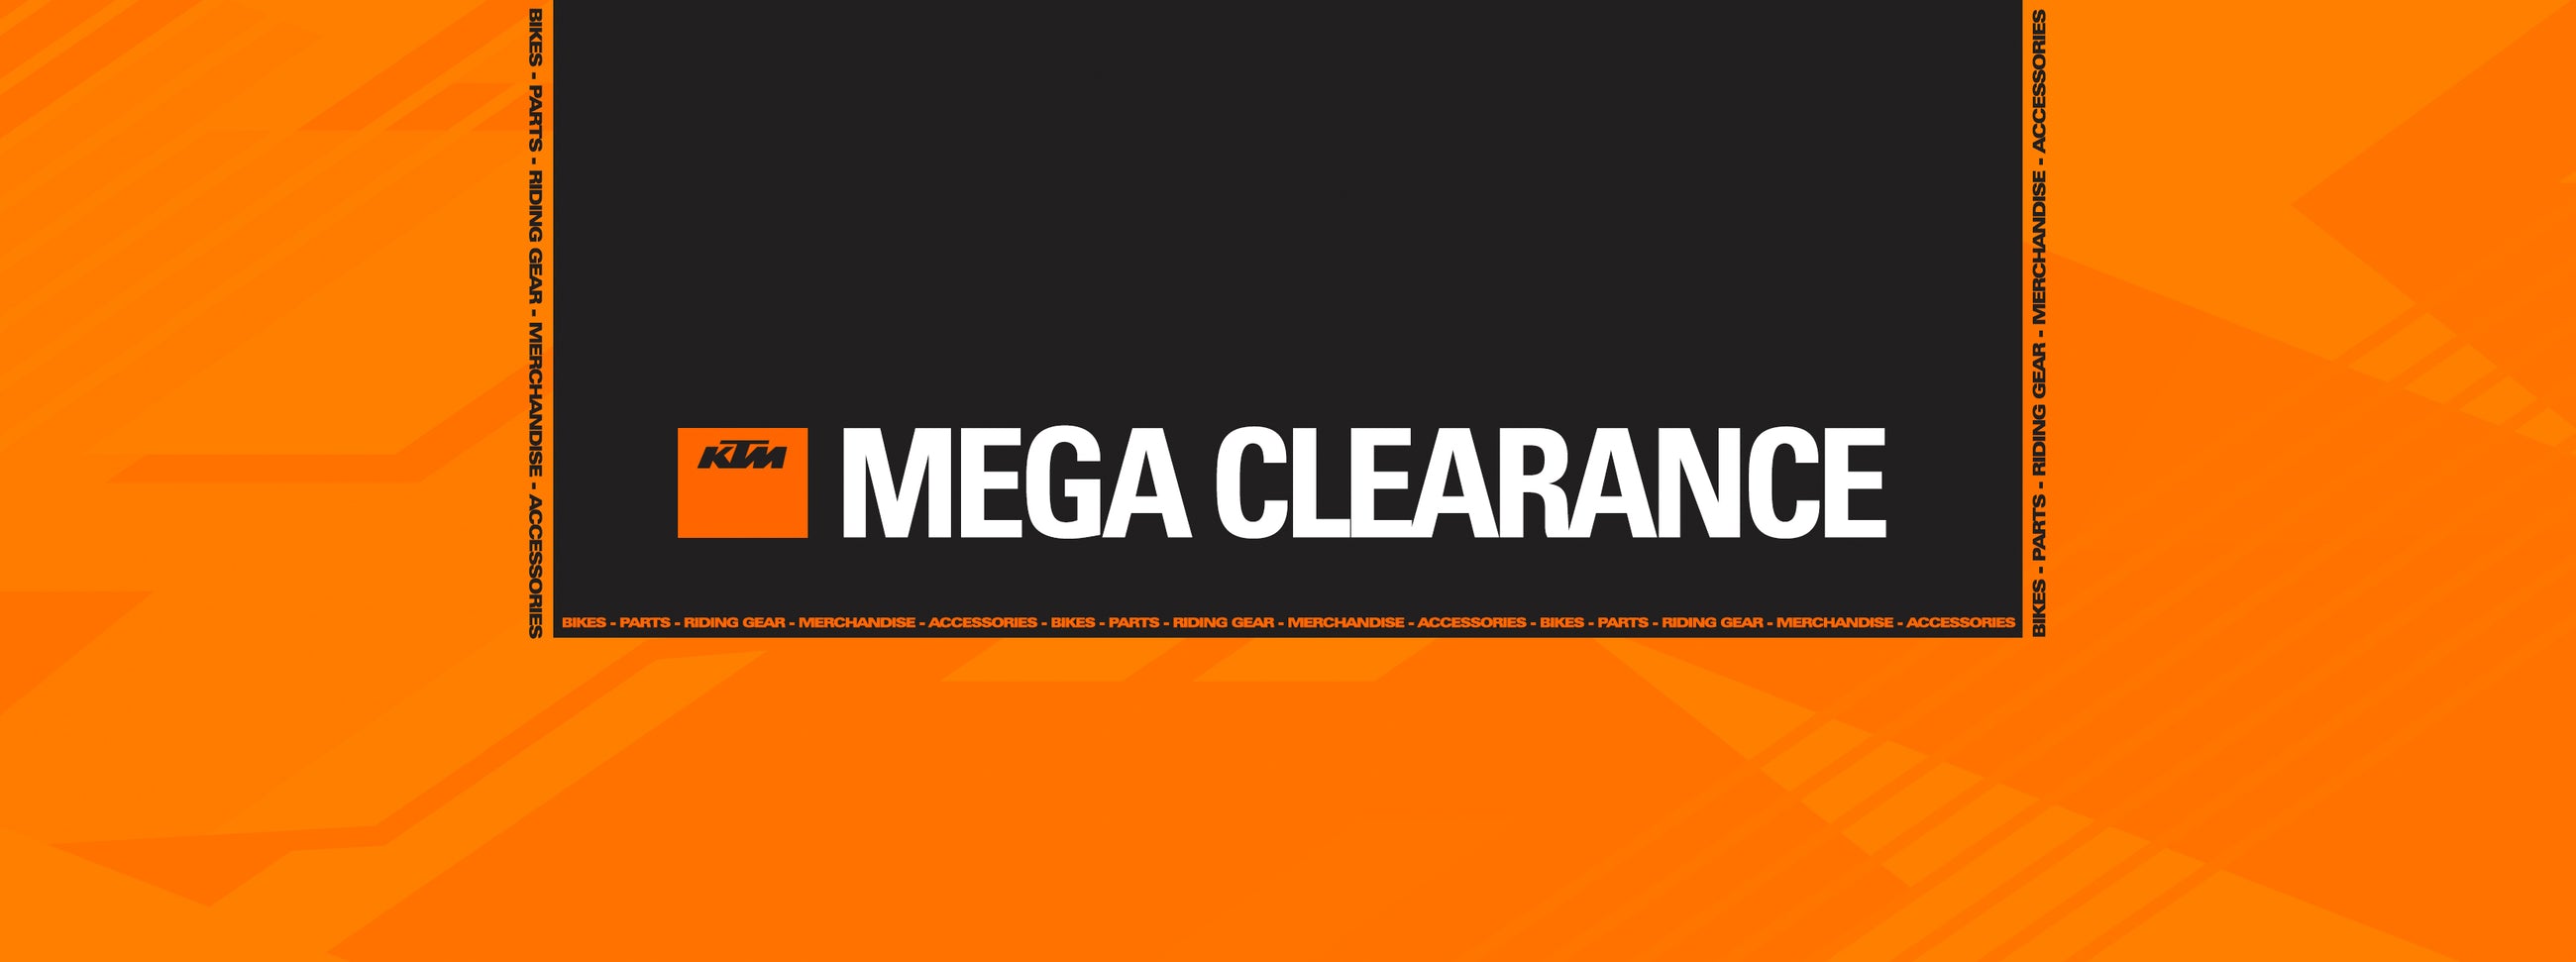 KTM Clearance Sale - 50% off